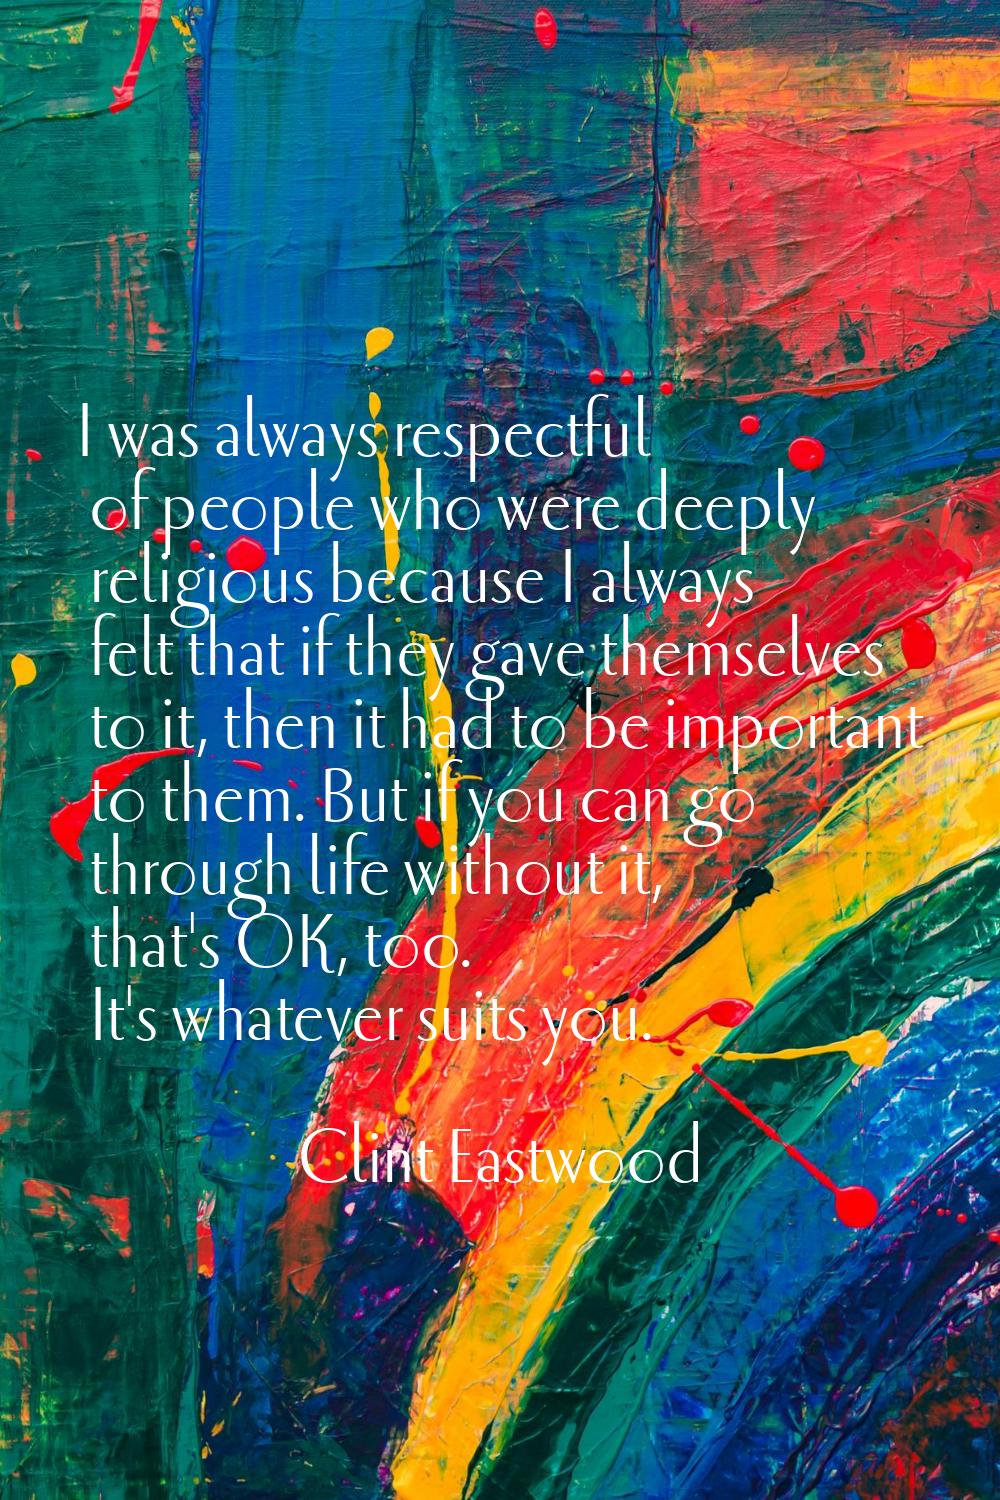 I was always respectful of people who were deeply religious because I always felt that if they gave